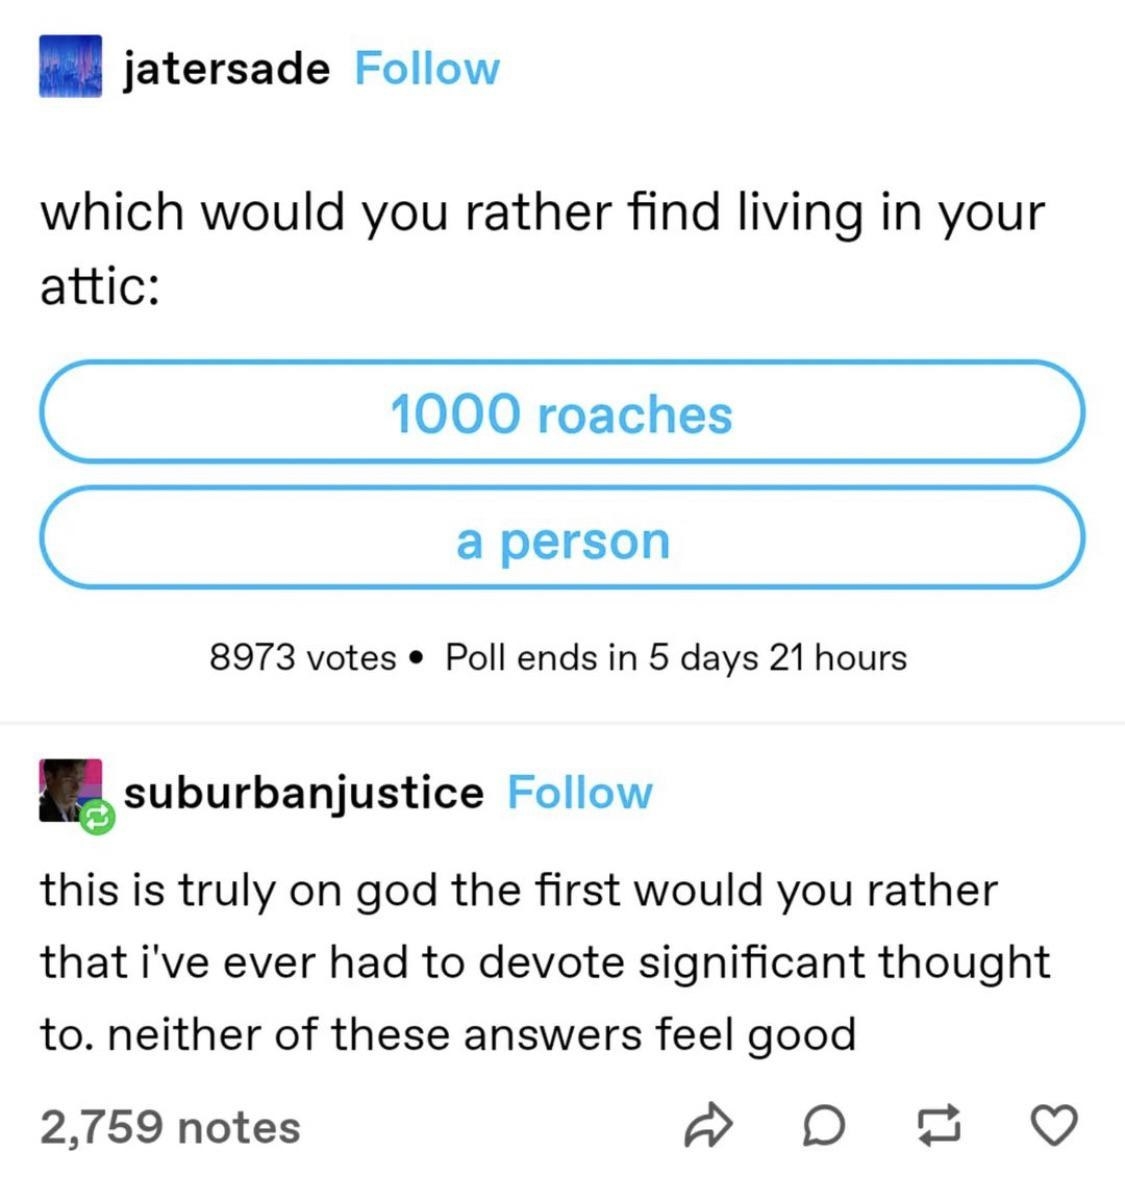 someone asks would you rather 1000 roaches or a person be in your attack and someone responds this is the first time i&#x27;ve had to devote lots of time to a would you rather